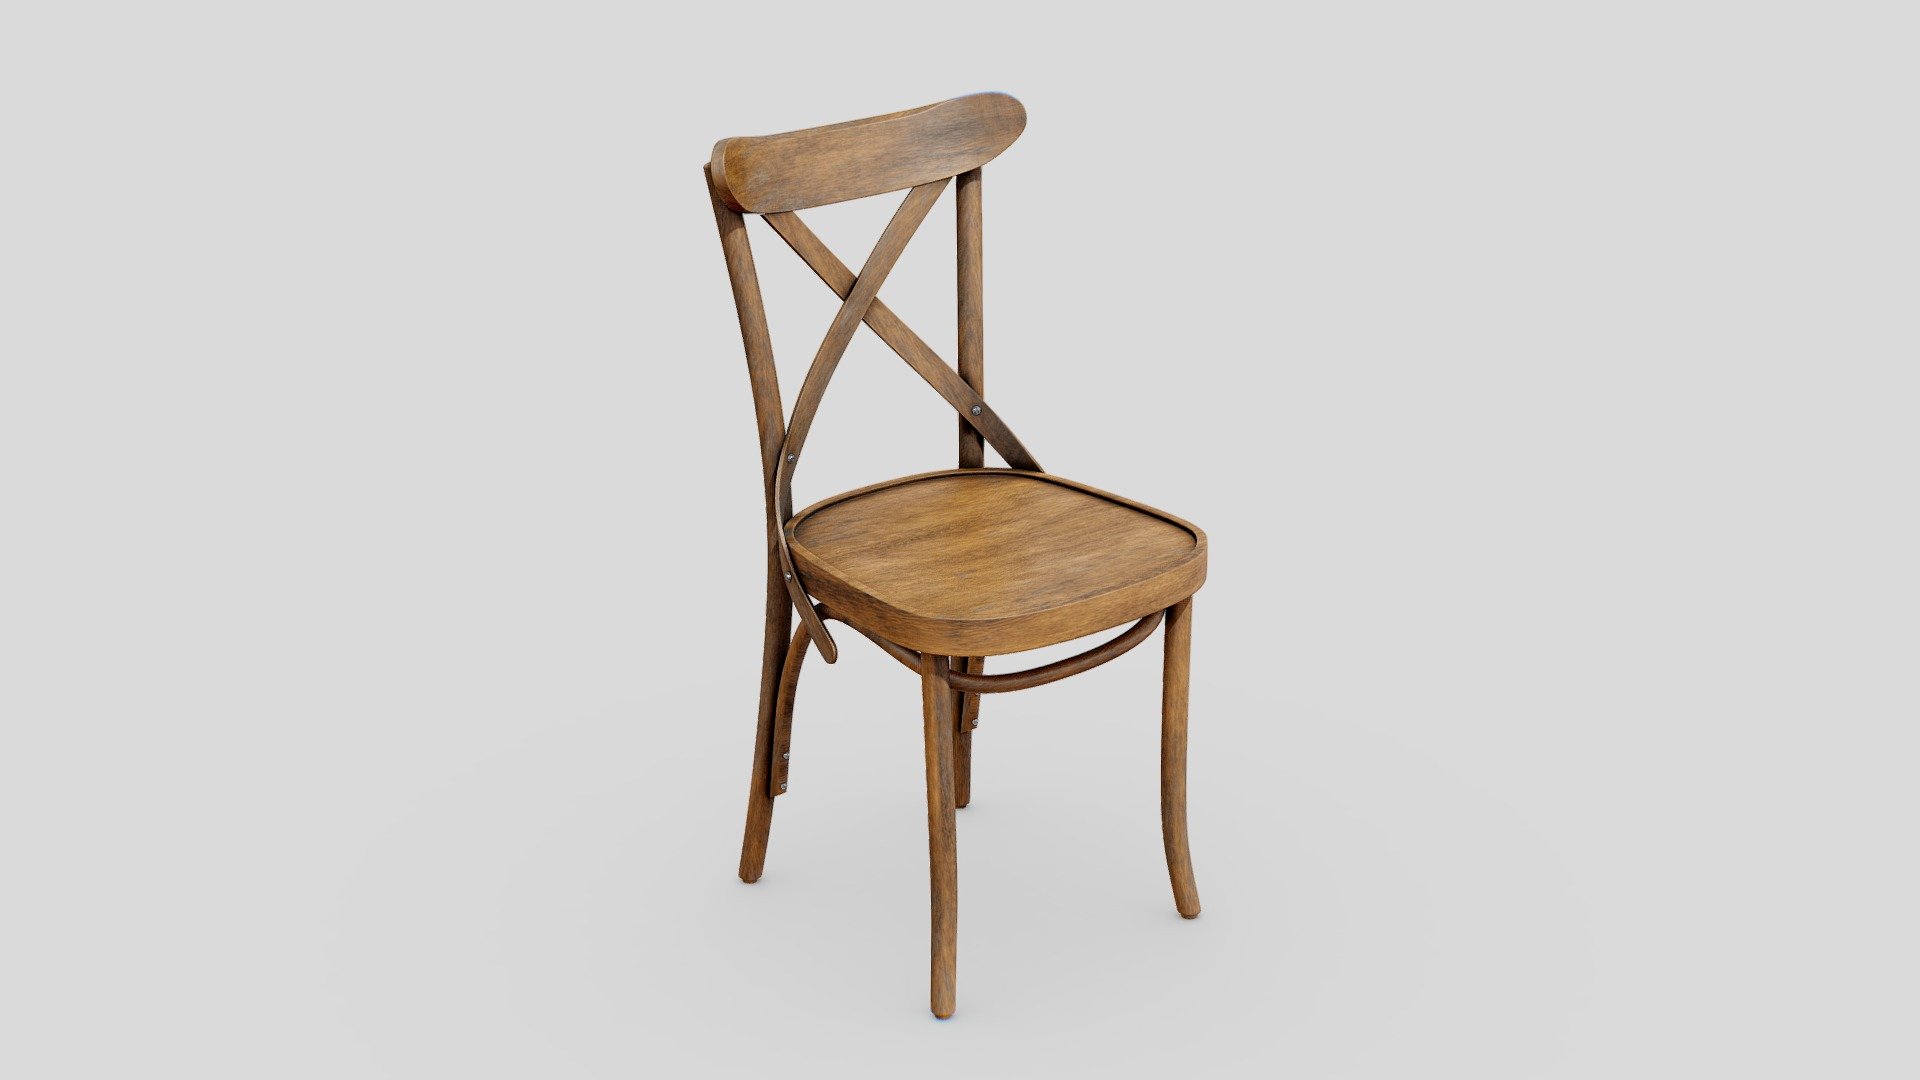 Free download：www.freepoly.org - Chair 02-Freepoly.org - Download Free 3D model by Freepoly.org (@blackrray) 3d model